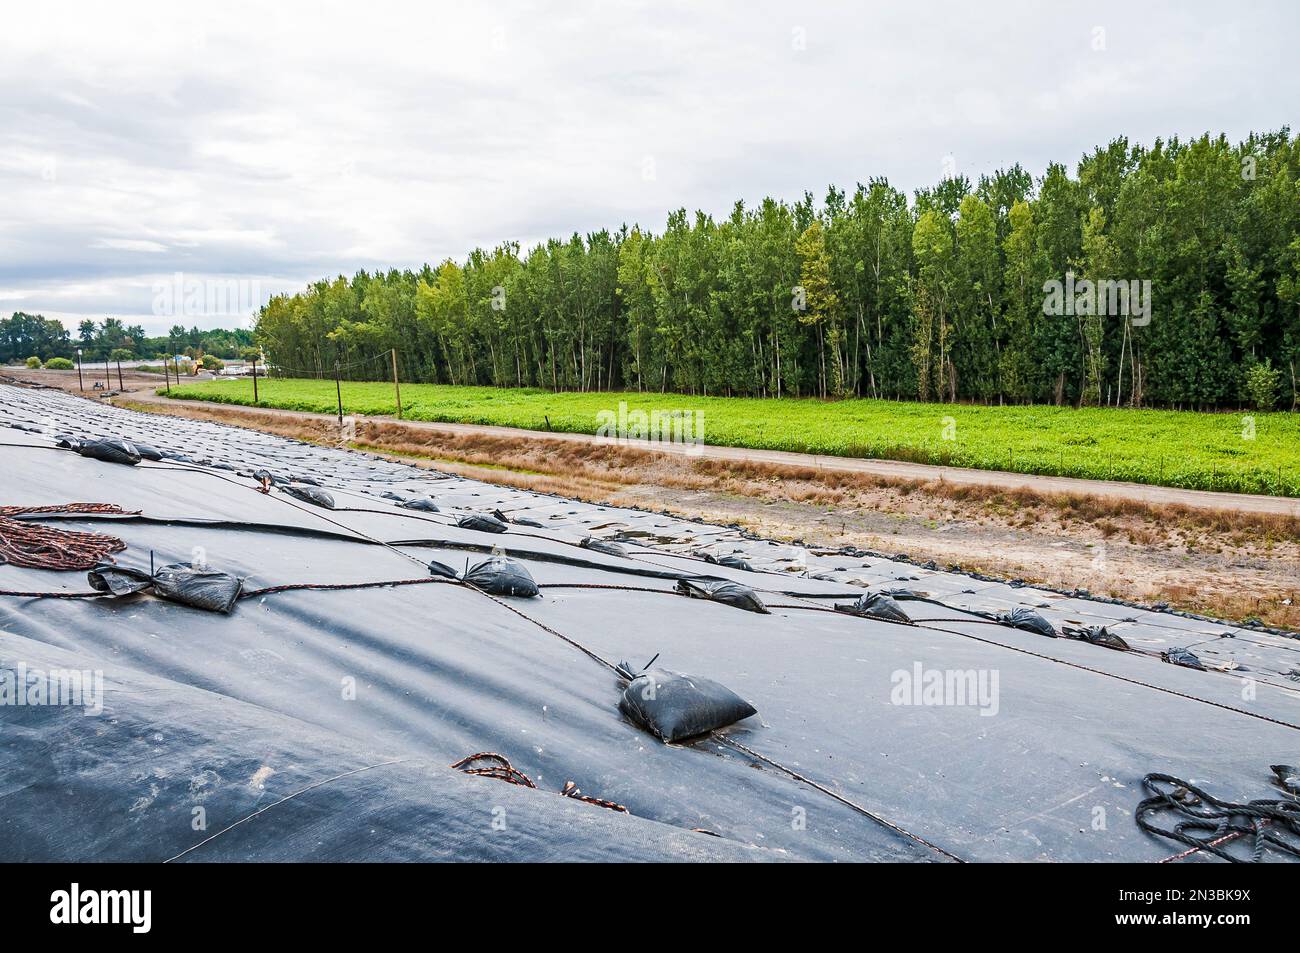 Weighted plastic sheeting covers a hillside in an active landfill.  Probably PVC geomembranes. Stock Photo